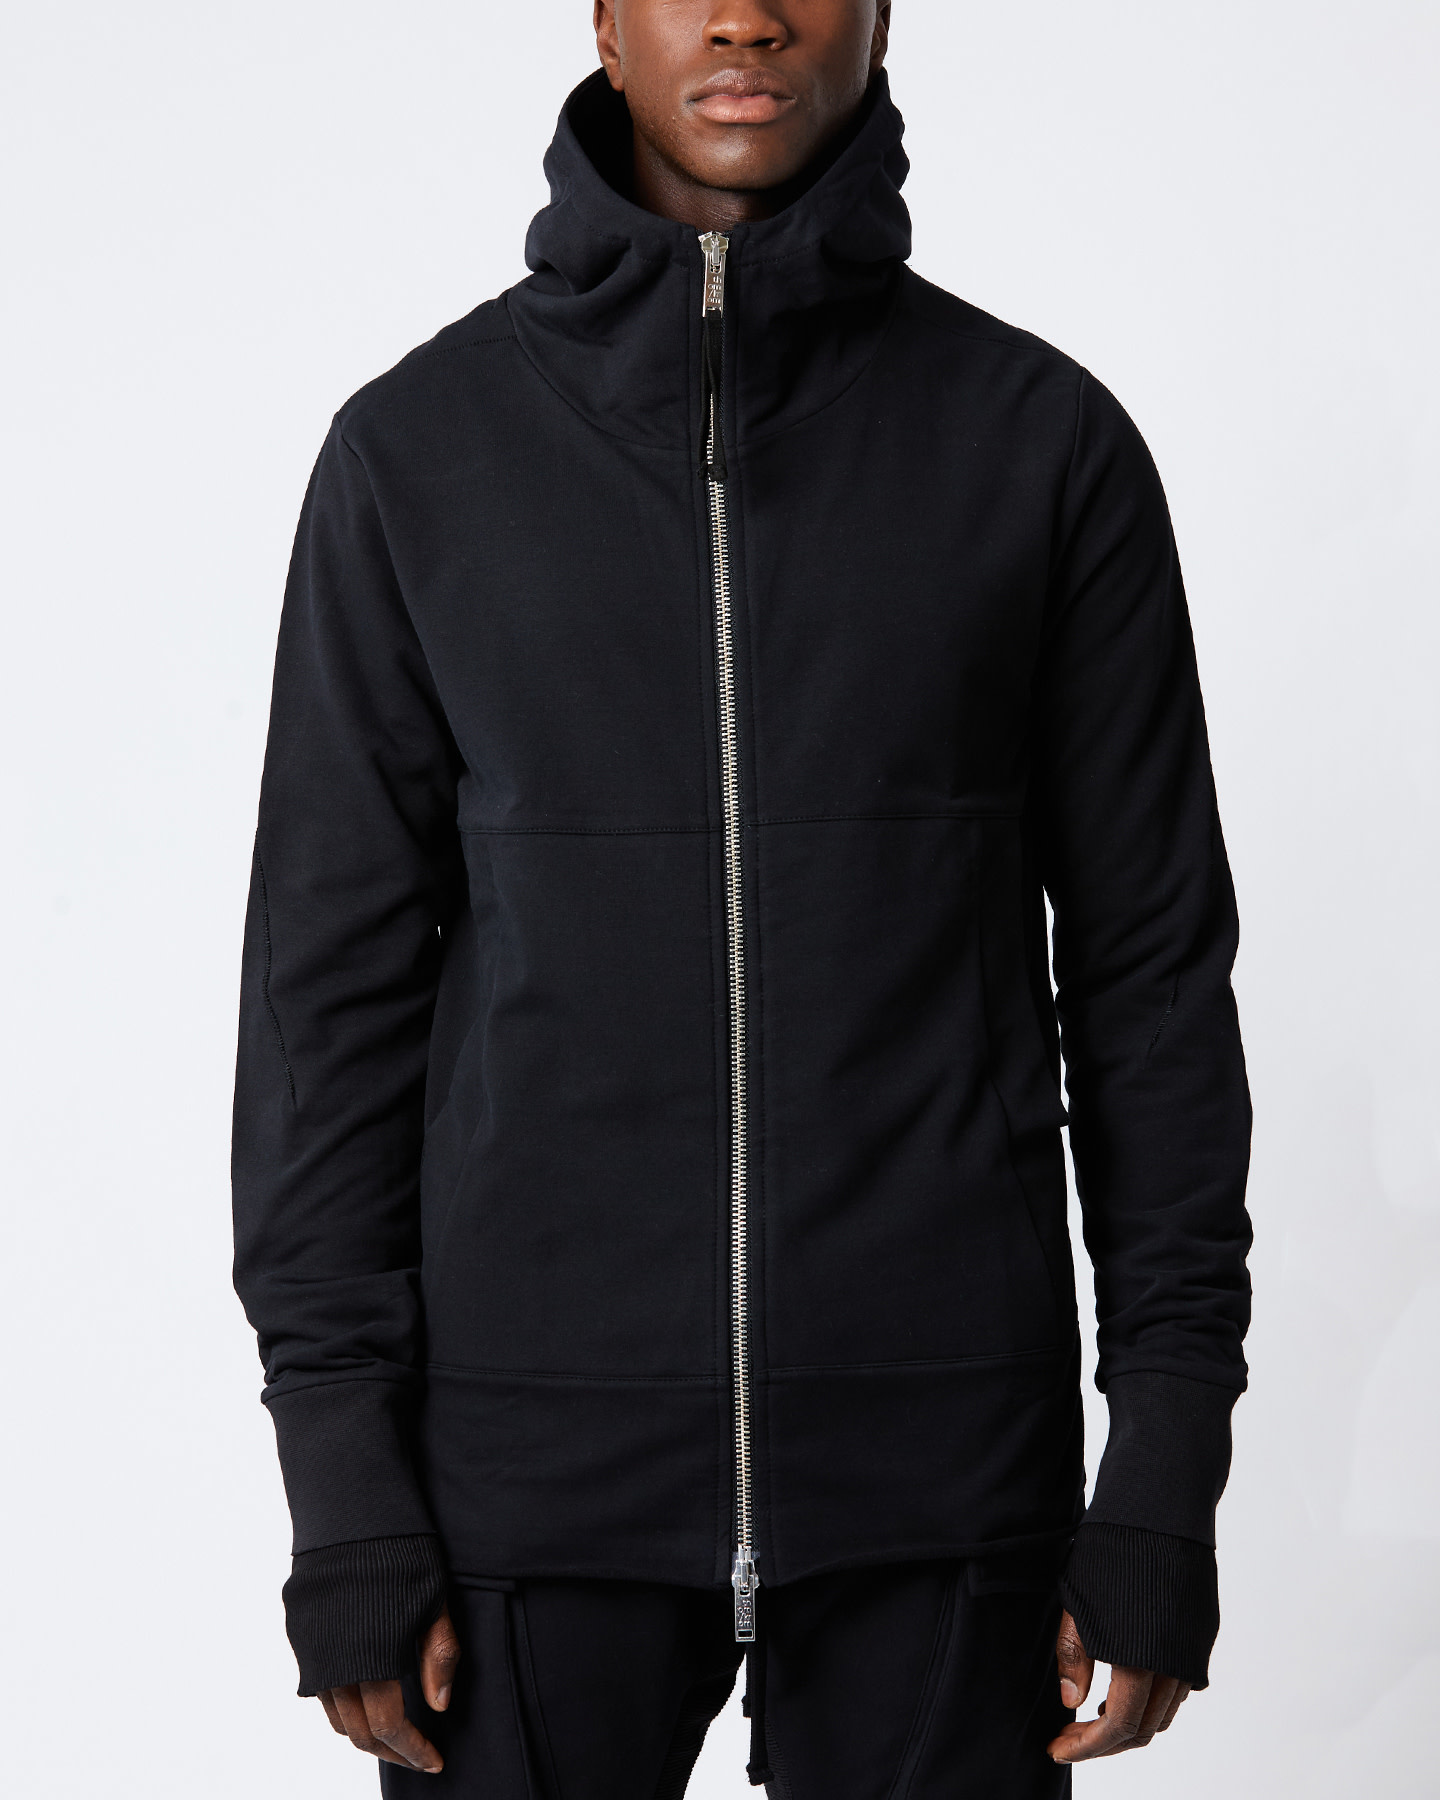 HIGH NECK FITTED ZIP FRONT HOODY - BLACK